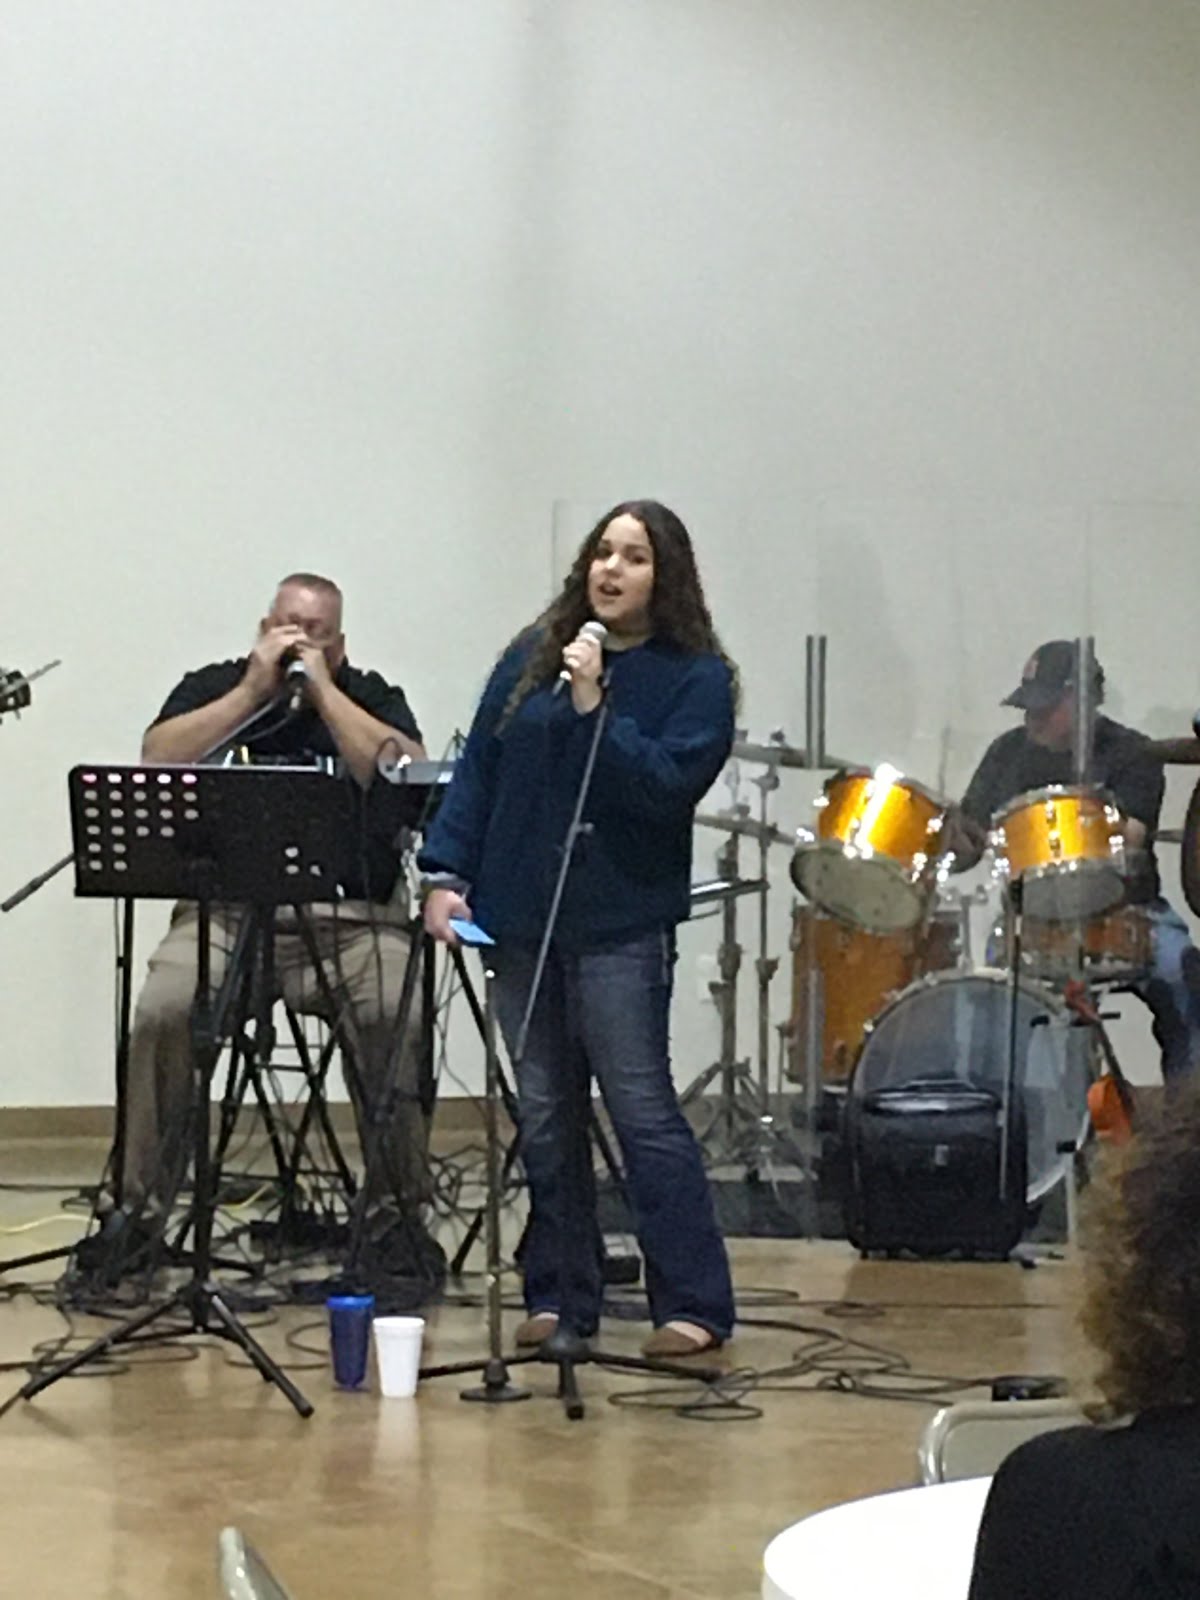 Jubilee singing with the church band